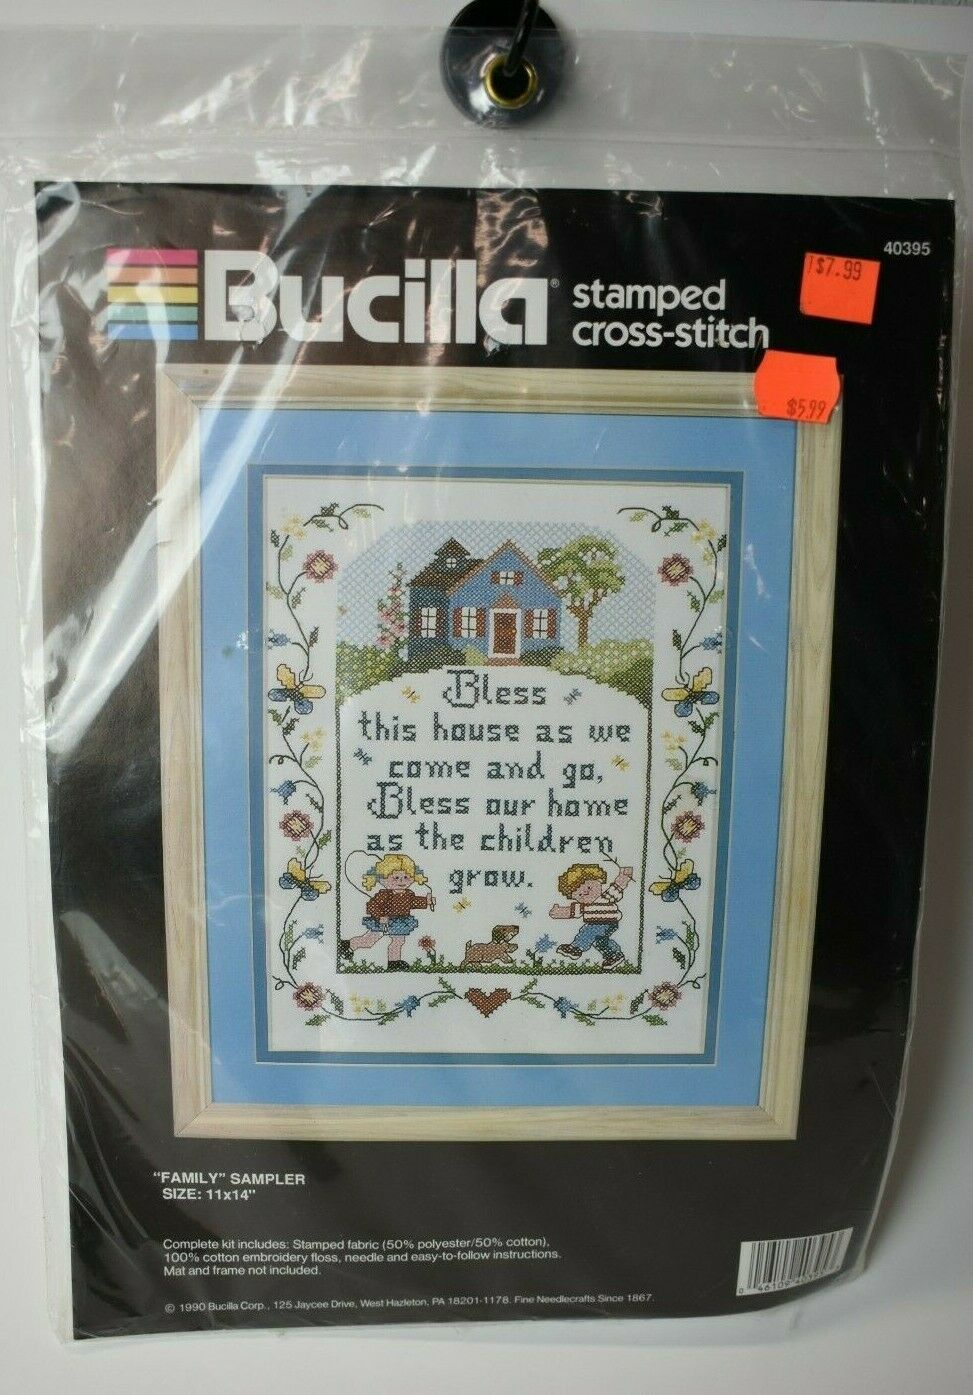 Primary image for Bucilla Stamped Cross Stitch Kit Family Sampler Bless this House 11x14 40395